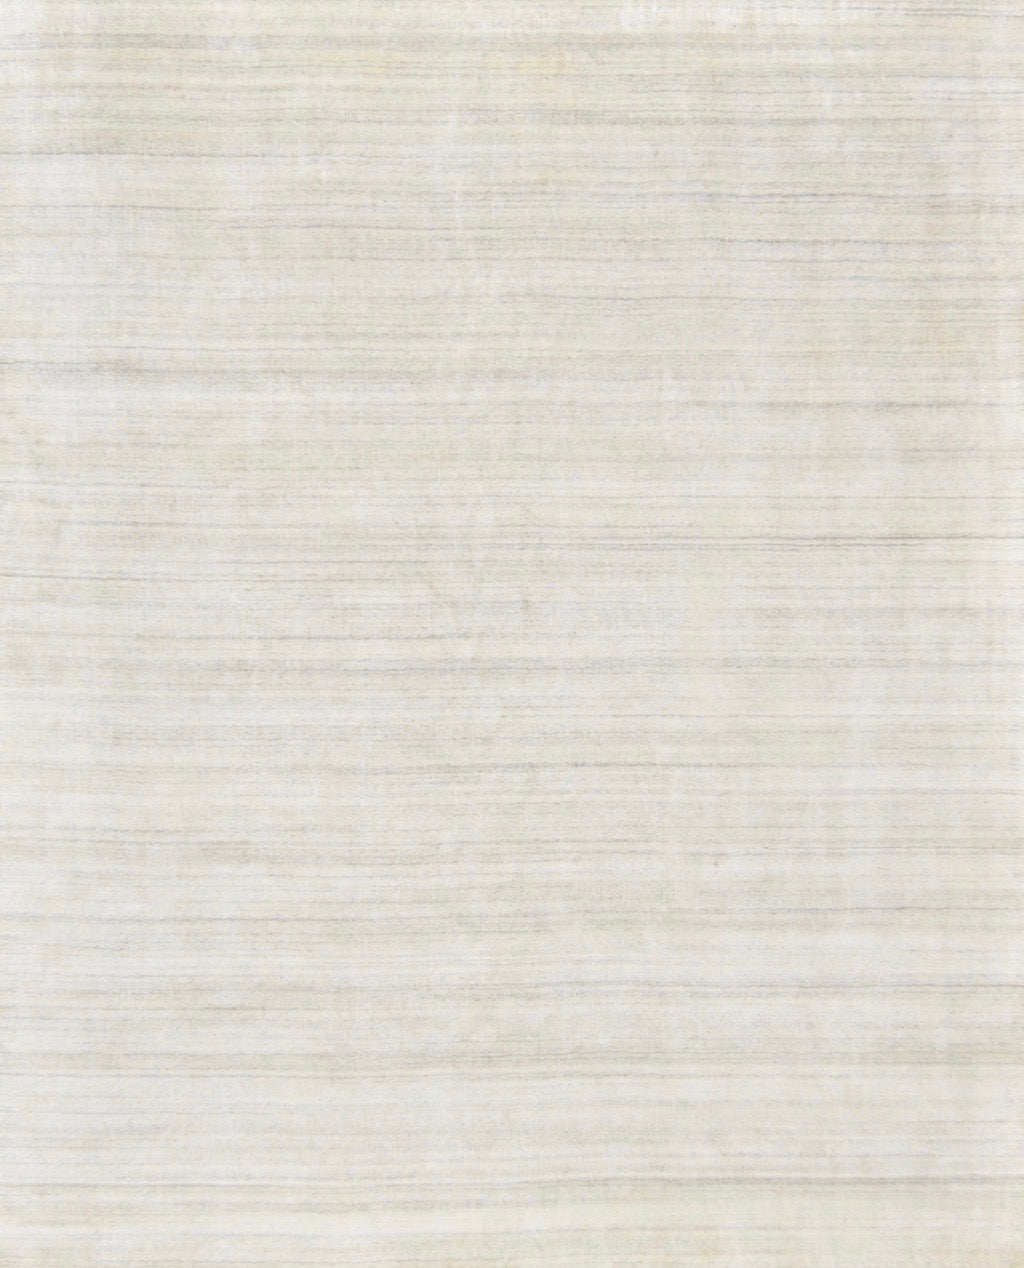 refined area rugs basix collection solid colored wool viscose ivory area rug online affordable handmade hand knotted rug store orange county